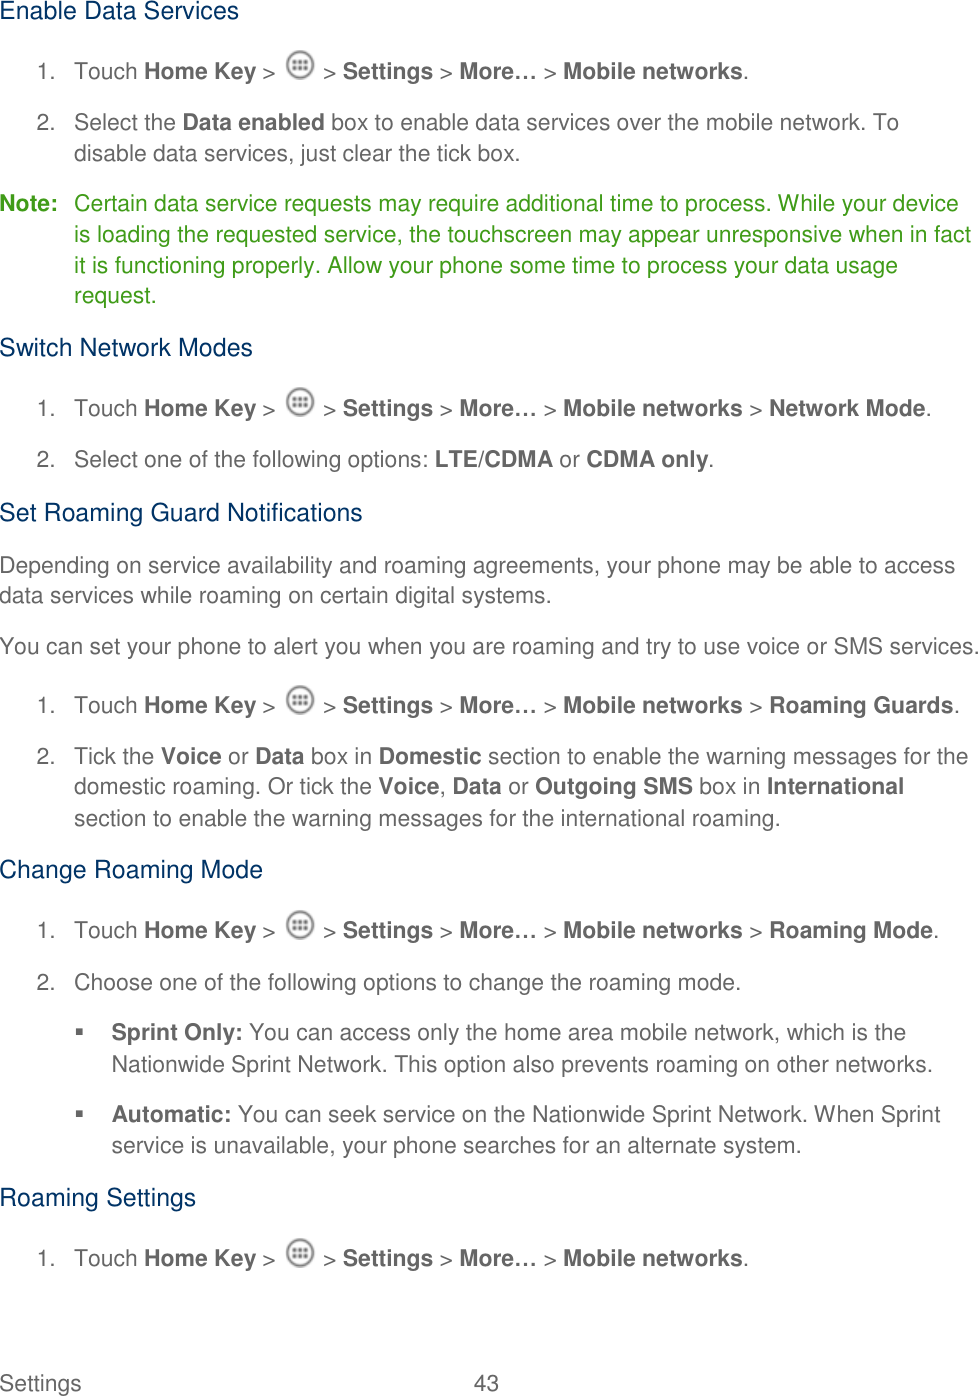 Settings    43 Enable Data Services  1.  Touch Home Key &gt;   &gt; Settings &gt; More… &gt; Mobile networks. 2.  Select the Data enabled box to enable data services over the mobile network. To disable data services, just clear the tick box. Note:  Certain data service requests may require additional time to process. While your device is loading the requested service, the touchscreen may appear unresponsive when in fact it is functioning properly. Allow your phone some time to process your data usage request. Switch Network Modes 1.  Touch Home Key &gt;   &gt; Settings &gt; More… &gt; Mobile networks &gt; Network Mode. 2.  Select one of the following options: LTE/CDMA or CDMA only. Set Roaming Guard Notifications Depending on service availability and roaming agreements, your phone may be able to access data services while roaming on certain digital systems. You can set your phone to alert you when you are roaming and try to use voice or SMS services. 1.  Touch Home Key &gt;   &gt; Settings &gt; More… &gt; Mobile networks &gt; Roaming Guards. 2.  Tick the Voice or Data box in Domestic section to enable the warning messages for the domestic roaming. Or tick the Voice, Data or Outgoing SMS box in International section to enable the warning messages for the international roaming. Change Roaming Mode 1.  Touch Home Key &gt;   &gt; Settings &gt; More… &gt; Mobile networks &gt; Roaming Mode. 2.  Choose one of the following options to change the roaming mode.  Sprint Only: You can access only the home area mobile network, which is the Nationwide Sprint Network. This option also prevents roaming on other networks.  Automatic: You can seek service on the Nationwide Sprint Network. When Sprint service is unavailable, your phone searches for an alternate system. Roaming Settings 1.  Touch Home Key &gt;   &gt; Settings &gt; More… &gt; Mobile networks. 